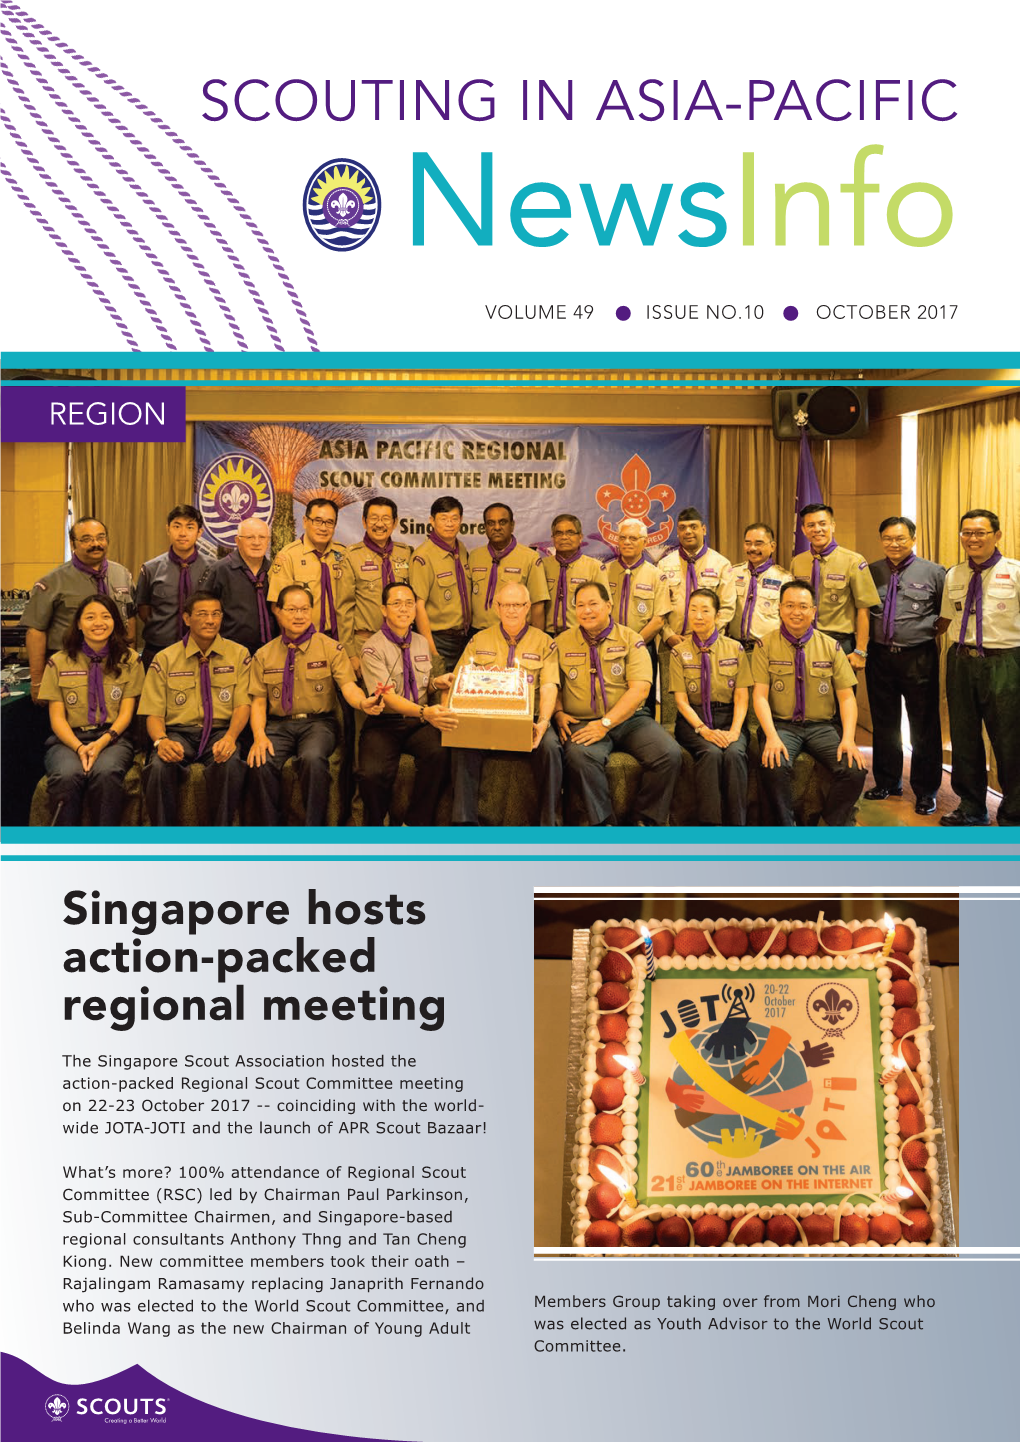 SCOUTING in ASIA-PACIFIC Newsinfo VOLUME 49 ISSUE NO.10 OCTOBER 2017